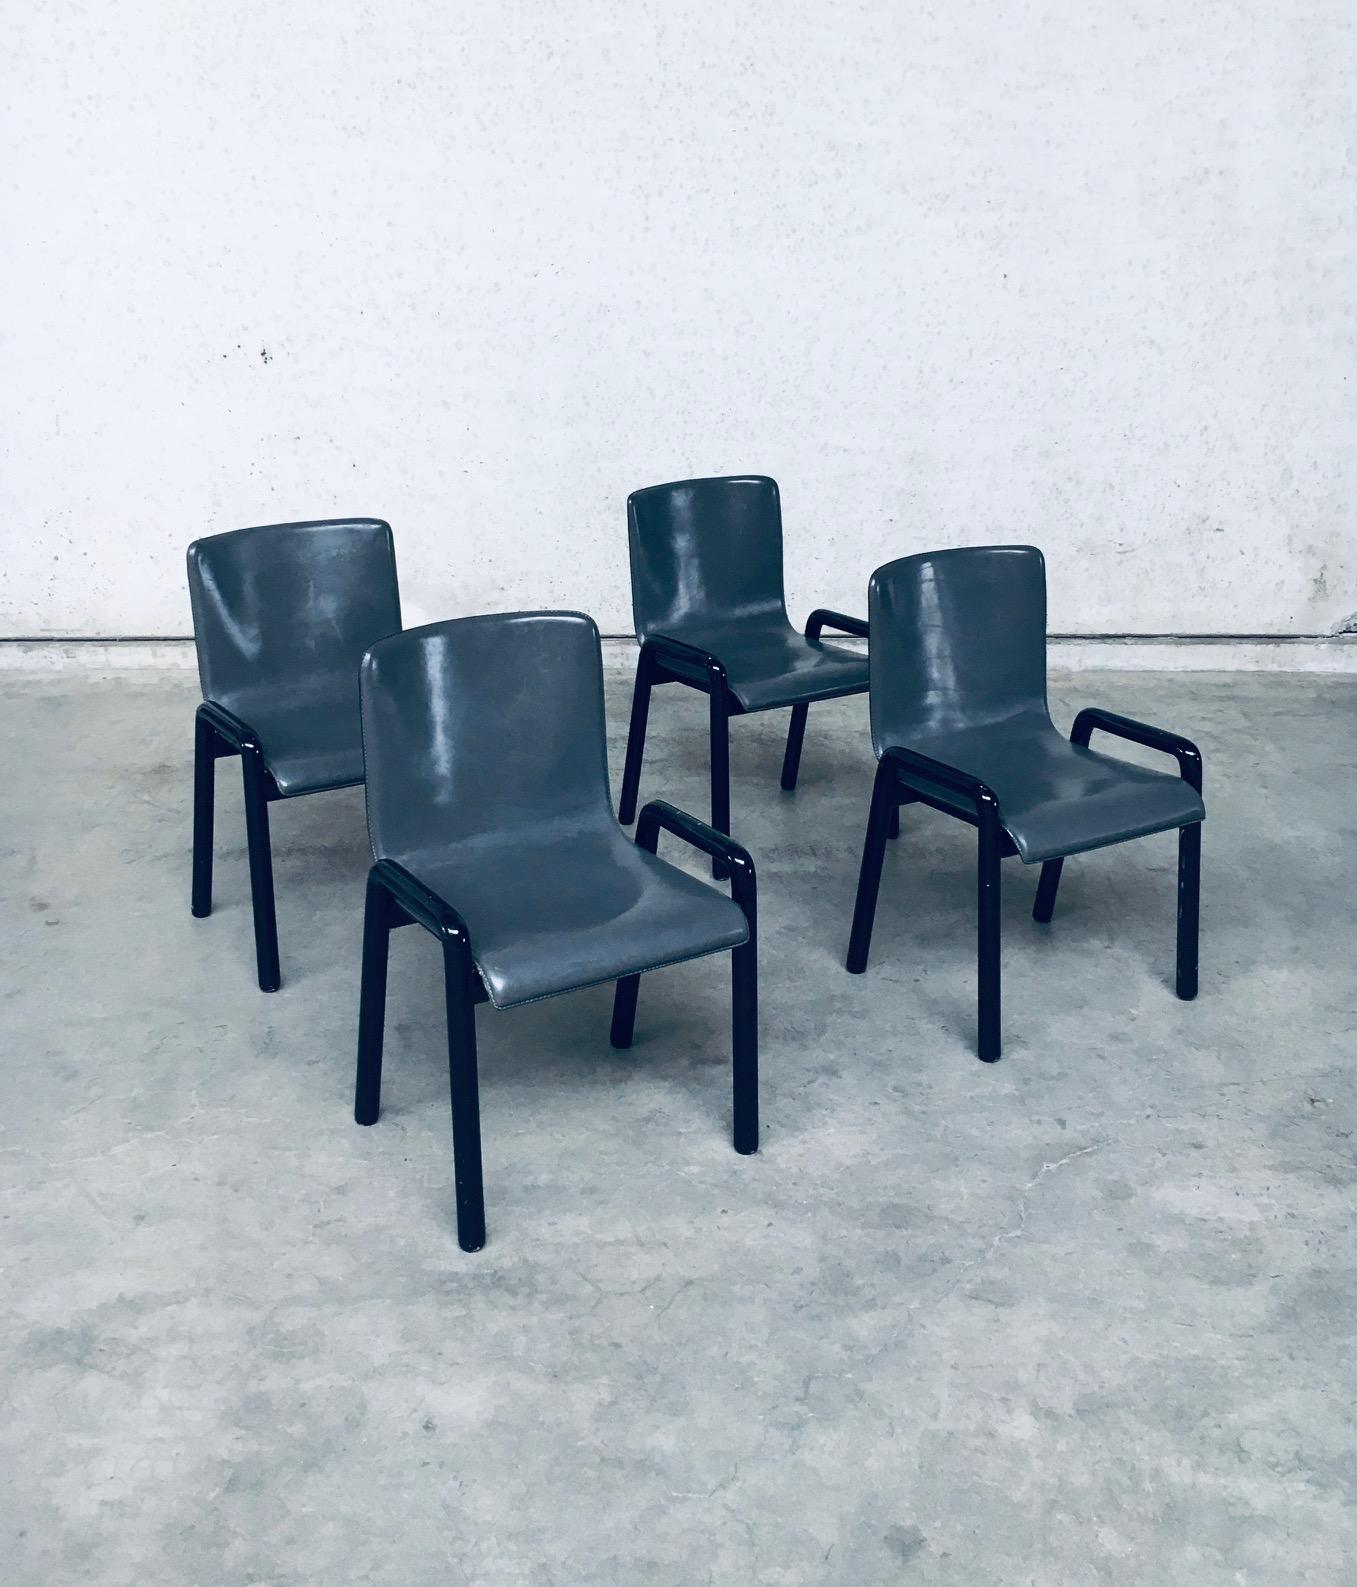 Vintage Postmodern Design Leather Dining Chair set of 4. Made in Italy, 1980's. Grey leather seat on black gloss lacquered wood bend base. In the style of Afra and Tobia Scarpa design chairs. These chairs have a nice minimalistic design. All chairs